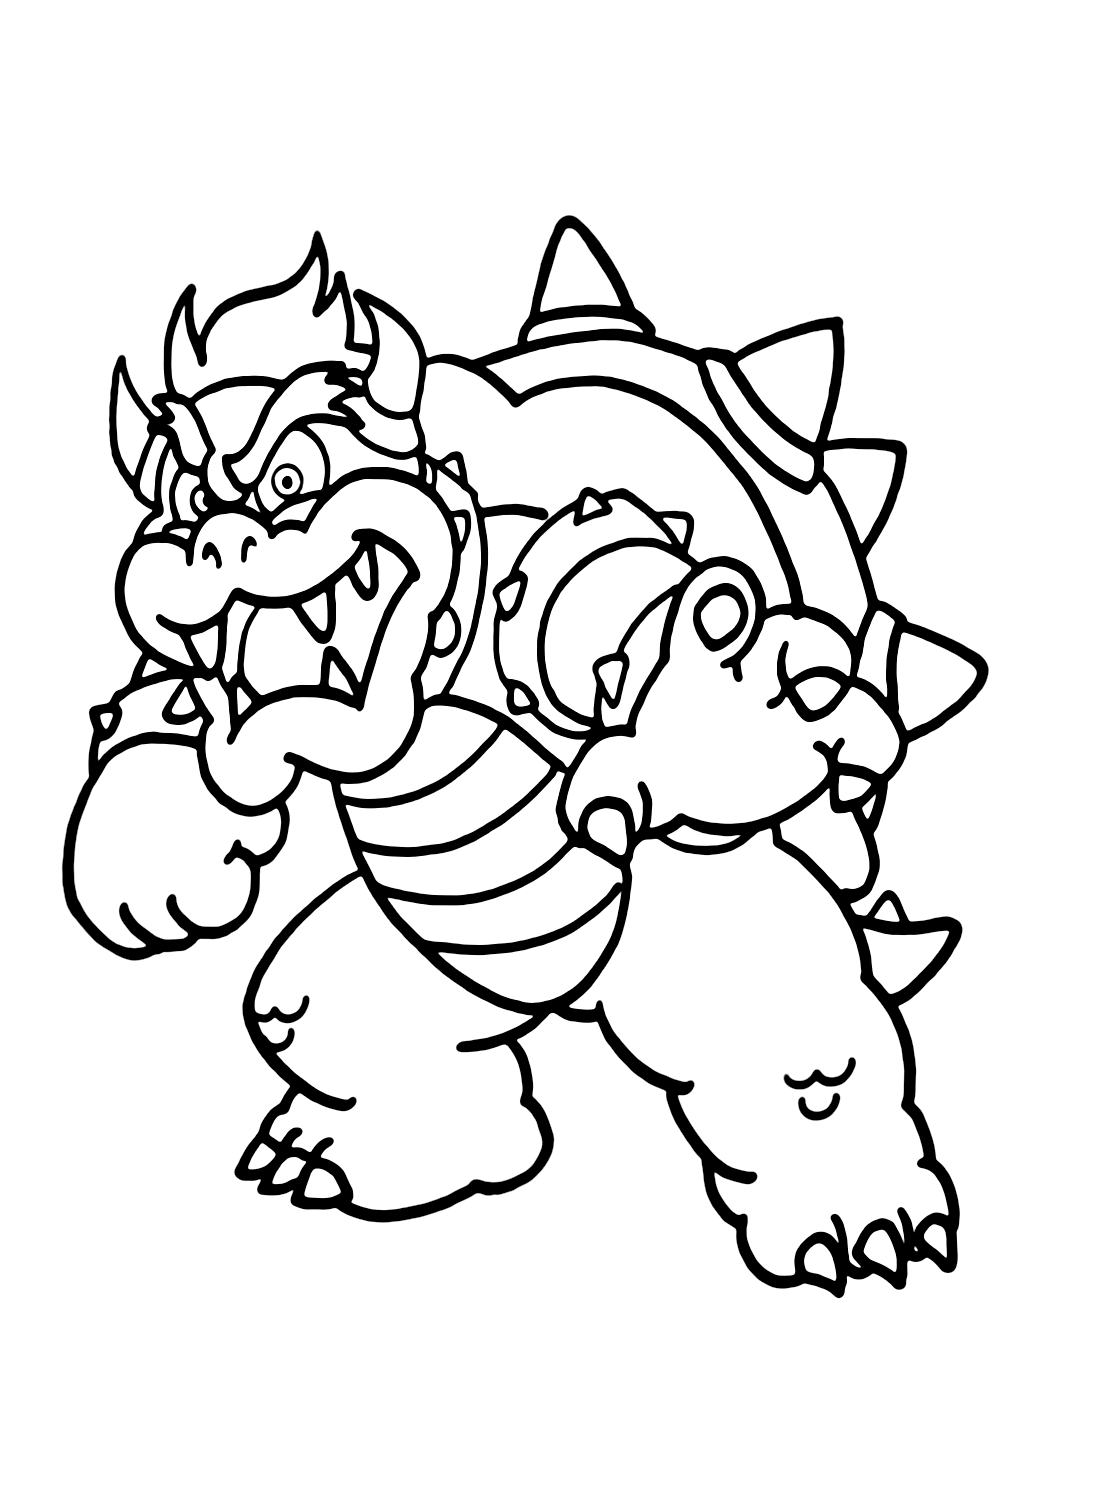 Images Bowser from Super Mario Coloring Page